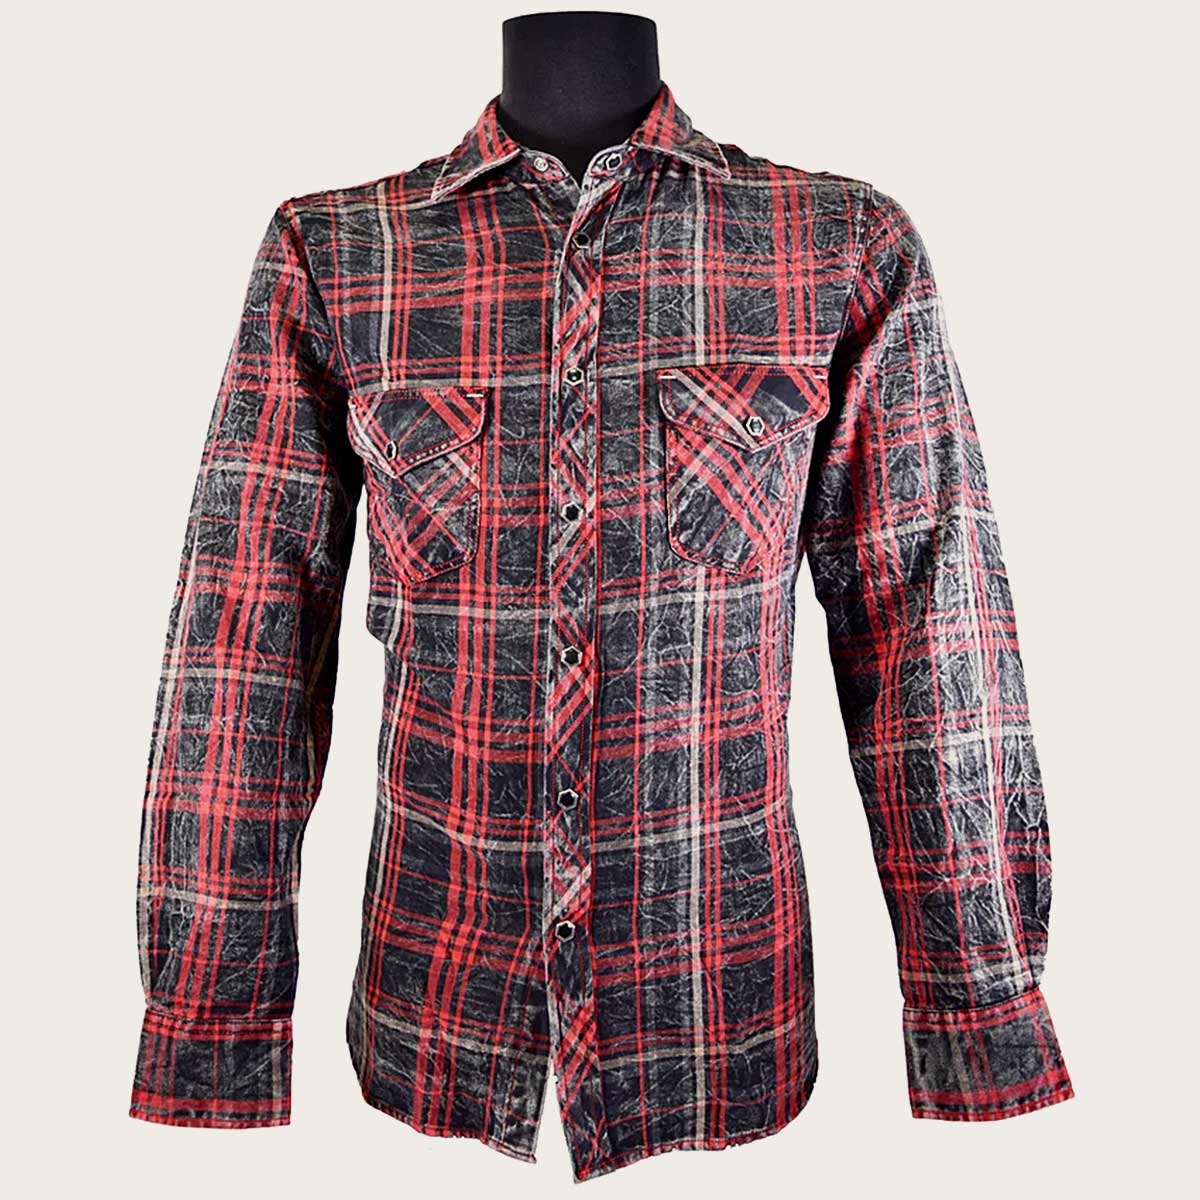 Black shirt for men with checkered print, snap closure